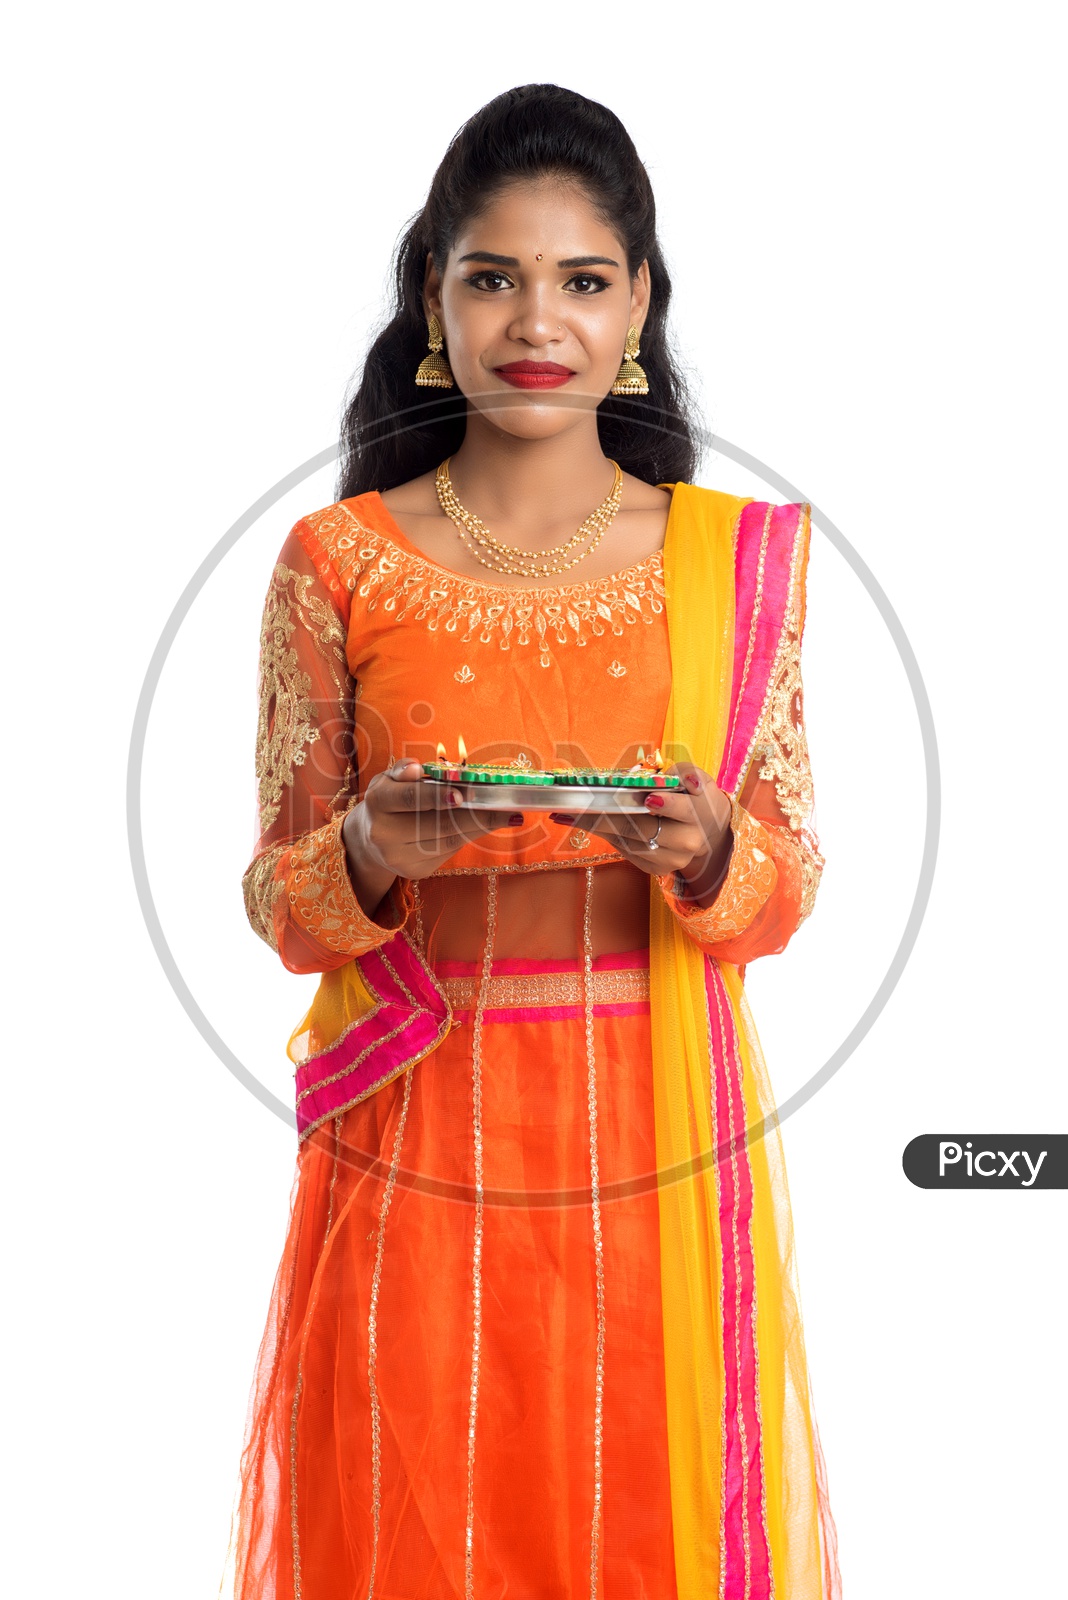 A young traditional smiling Indian woman holding Diyas in hand